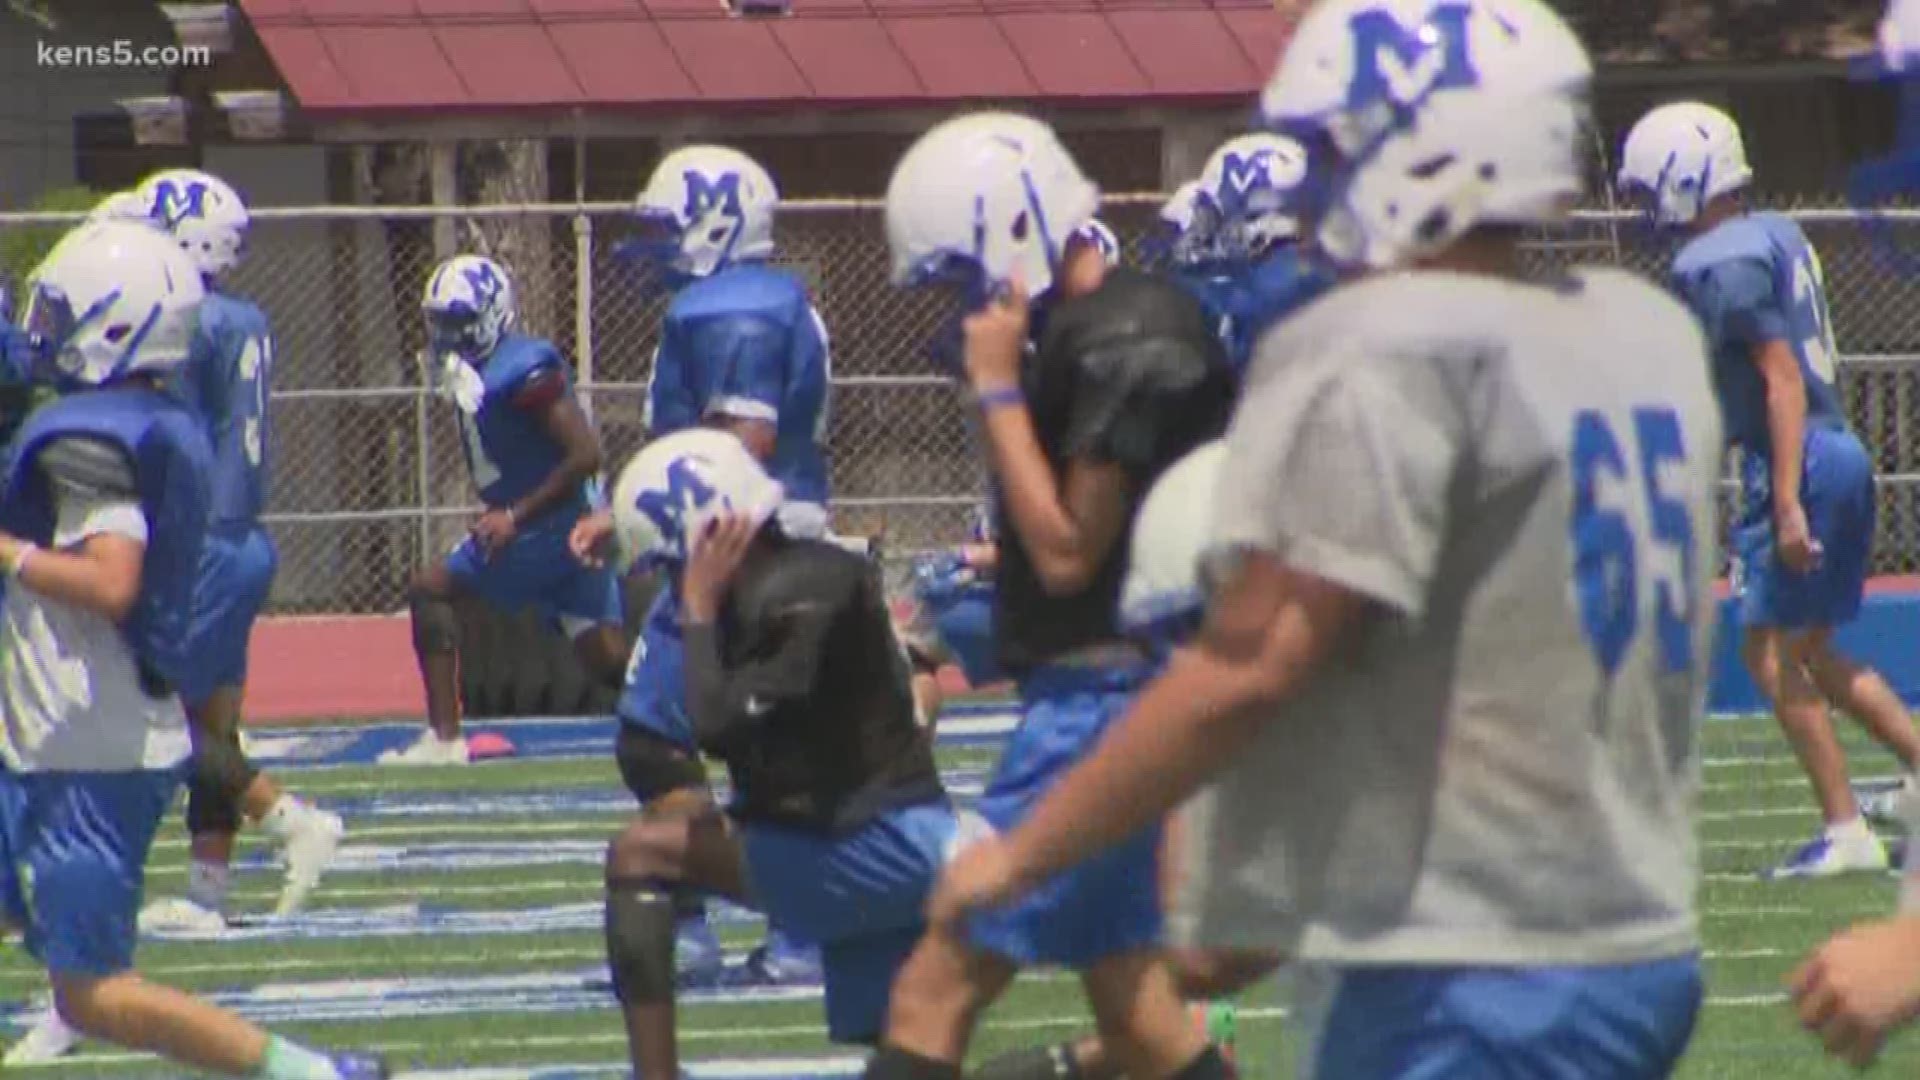 Friday means high school football; unfortunately, it also means more opportunities for student-athletes to suffer injuries. Researchers in San Antonio are working hard to figure out how to prevent head injuries.